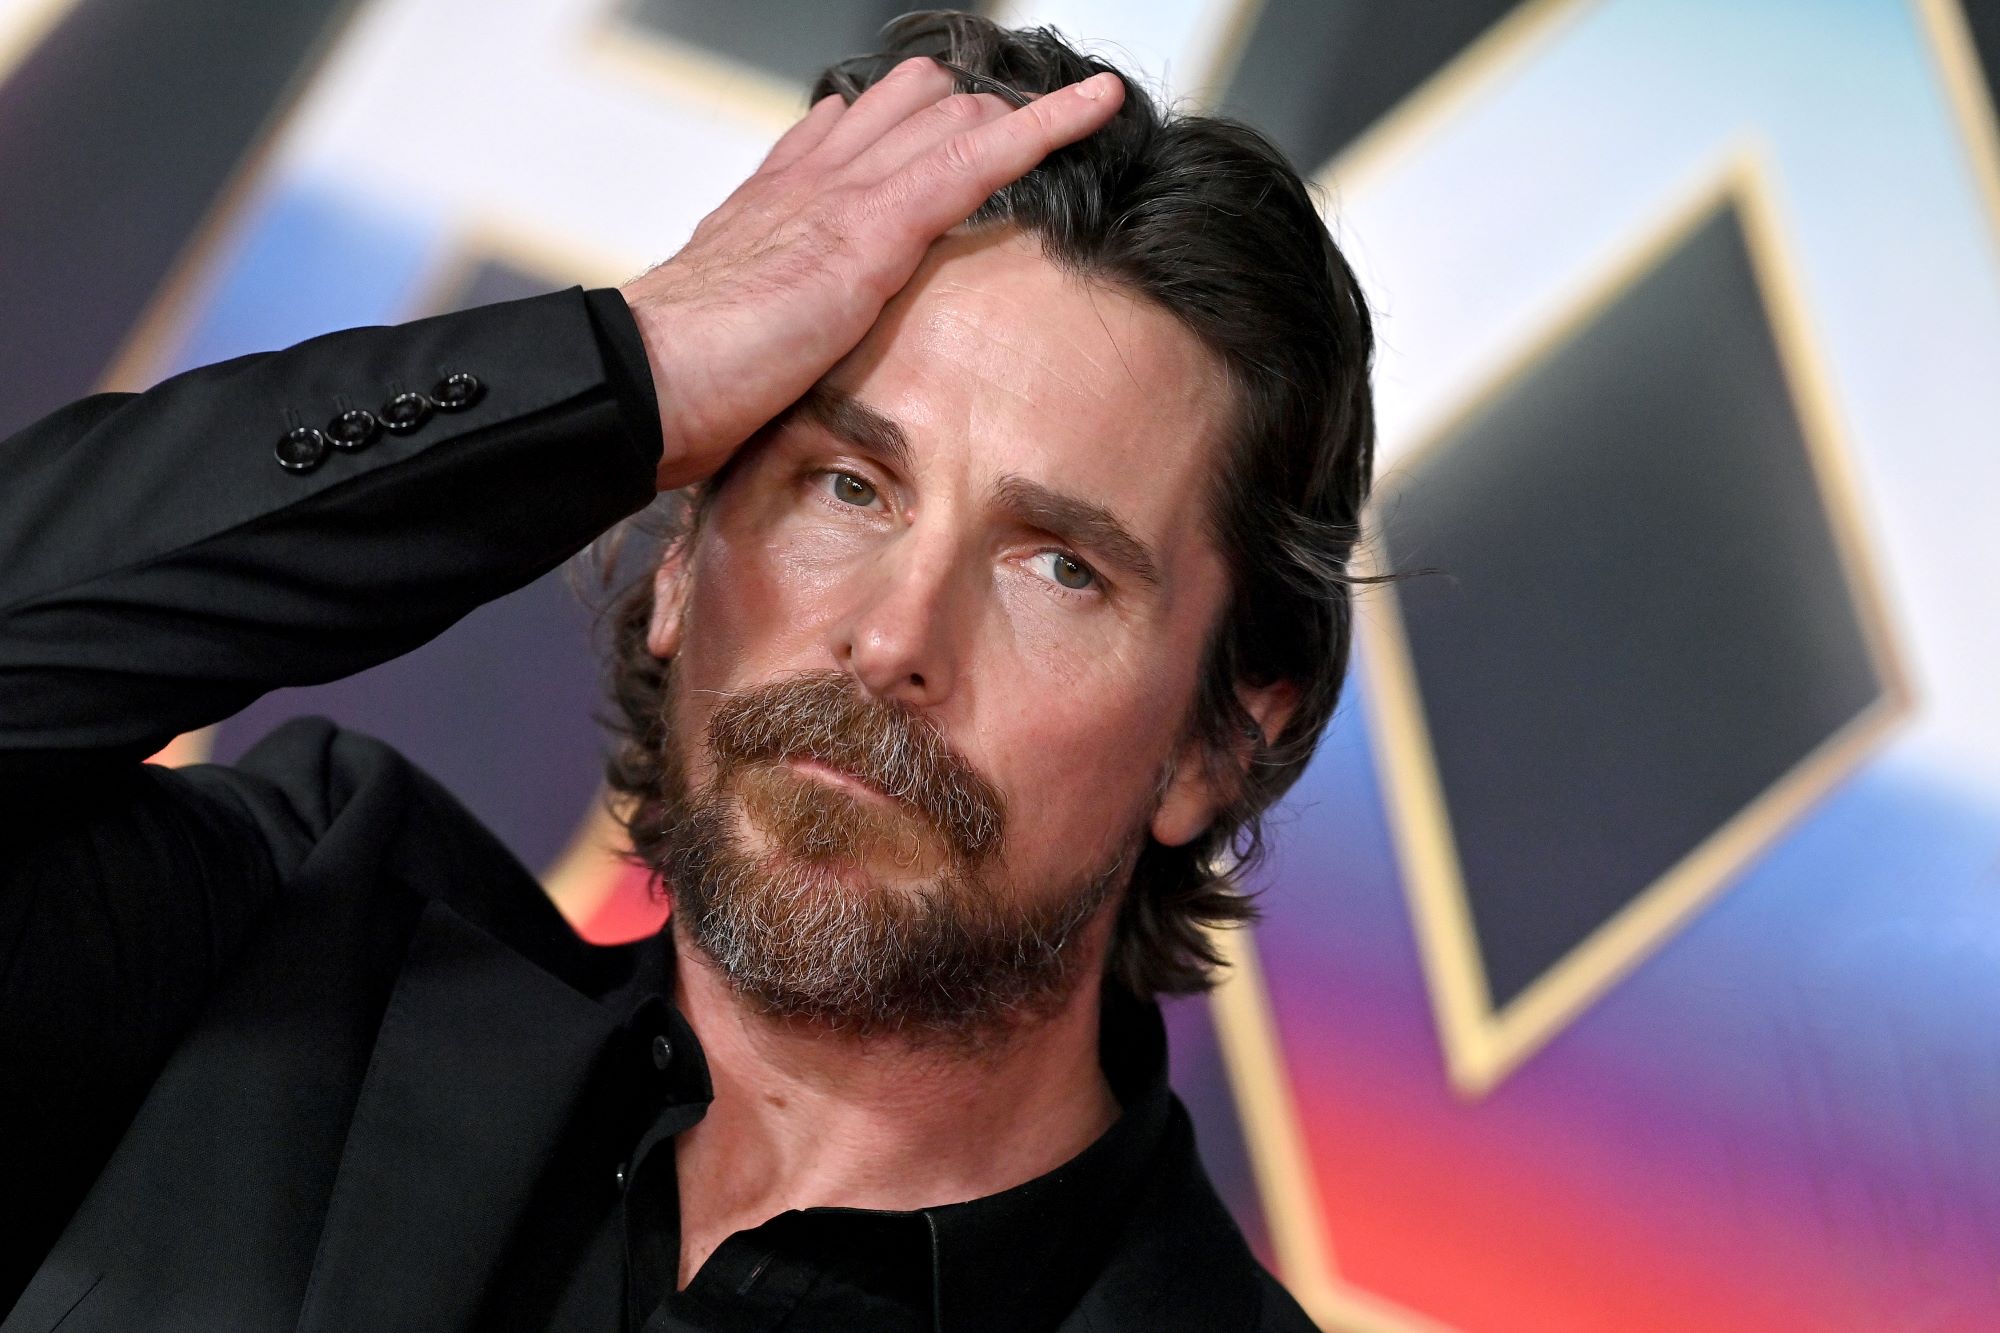 Christian Bale, who stars in 'Thor: Love and Thunder,' wears a black suit over a black button-up shirt.